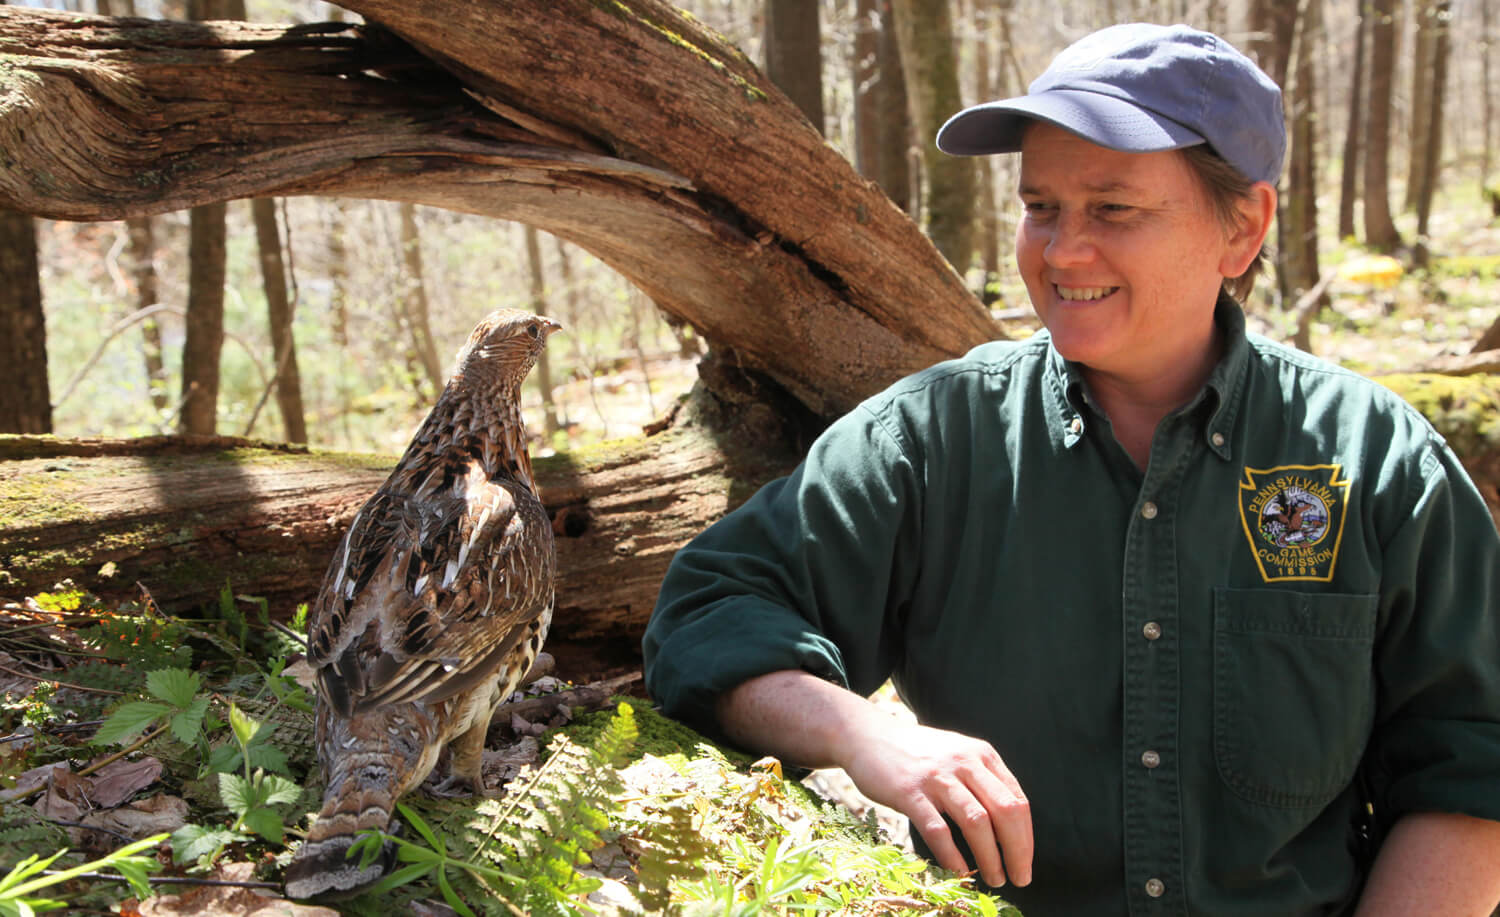 Lisa Williams, PGC Biologist and Program Specialist for Ruffed Grouse